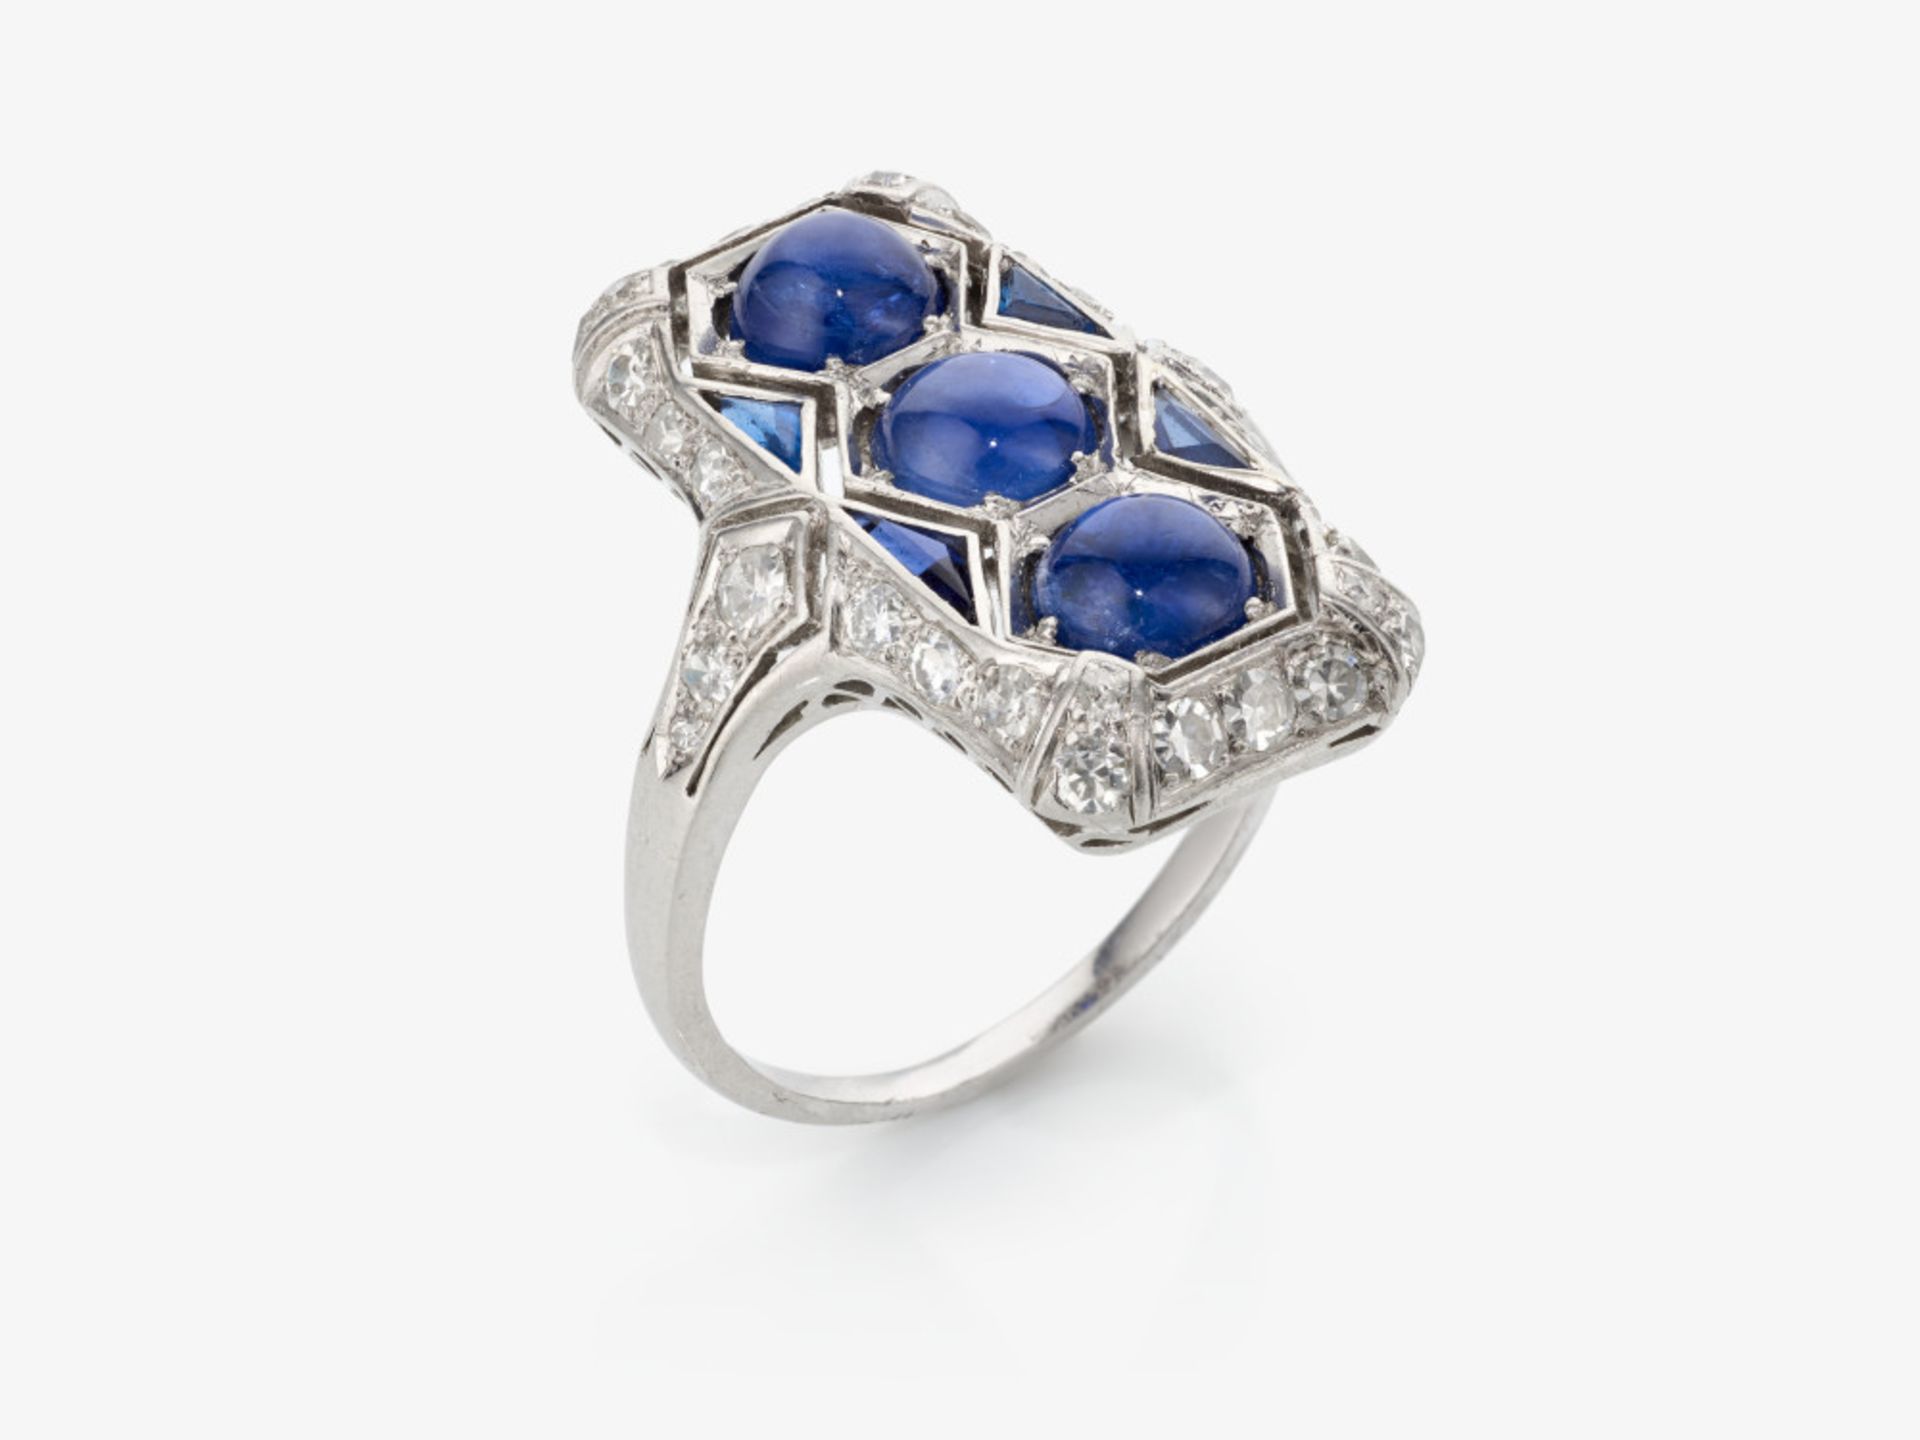 A historical ring decorated with sapphires and diamonds